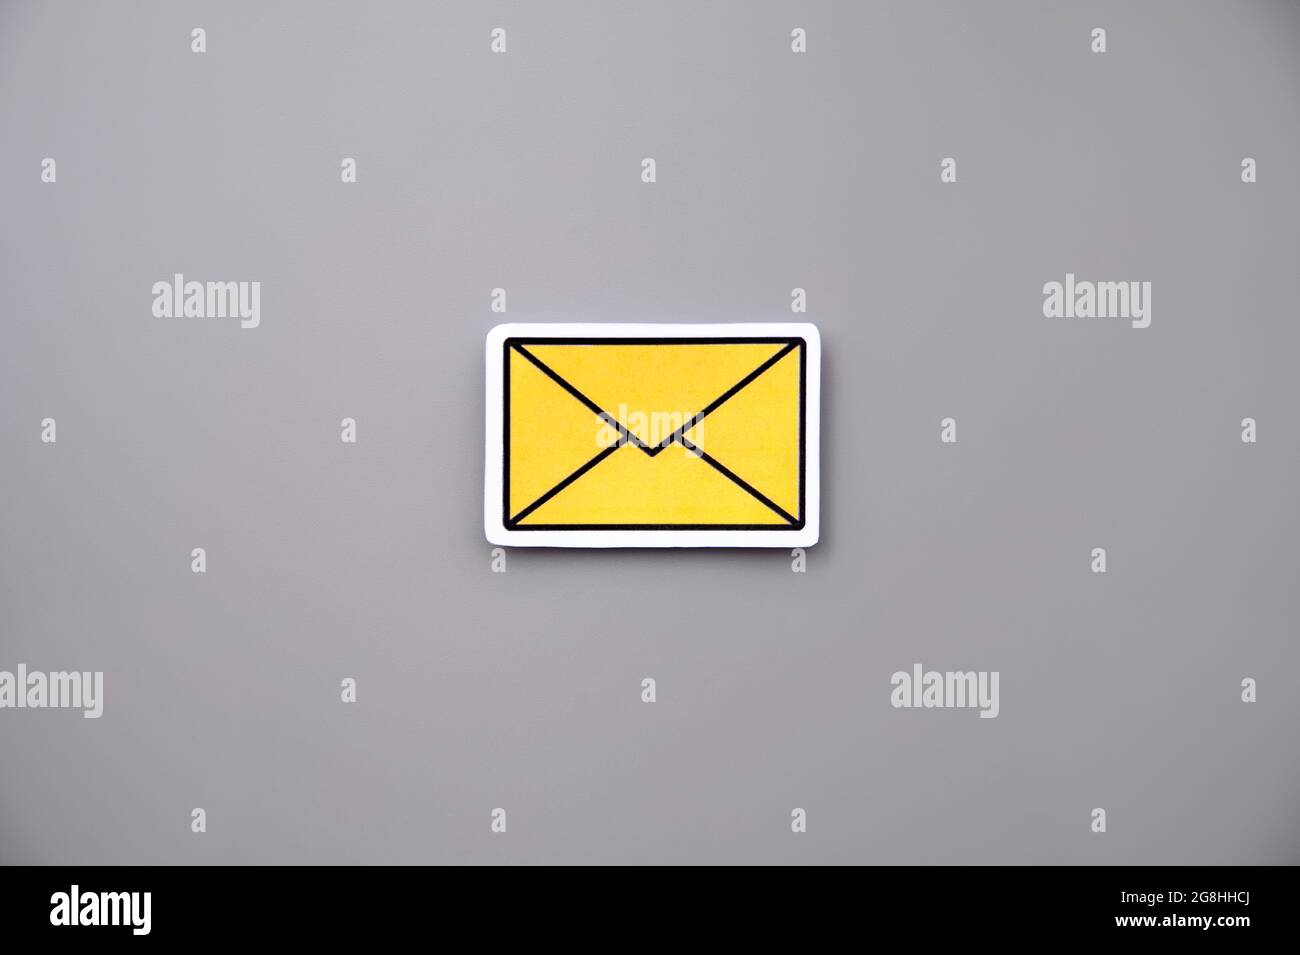 Yellow message sign or envelope icon against a grey background Stock Photo